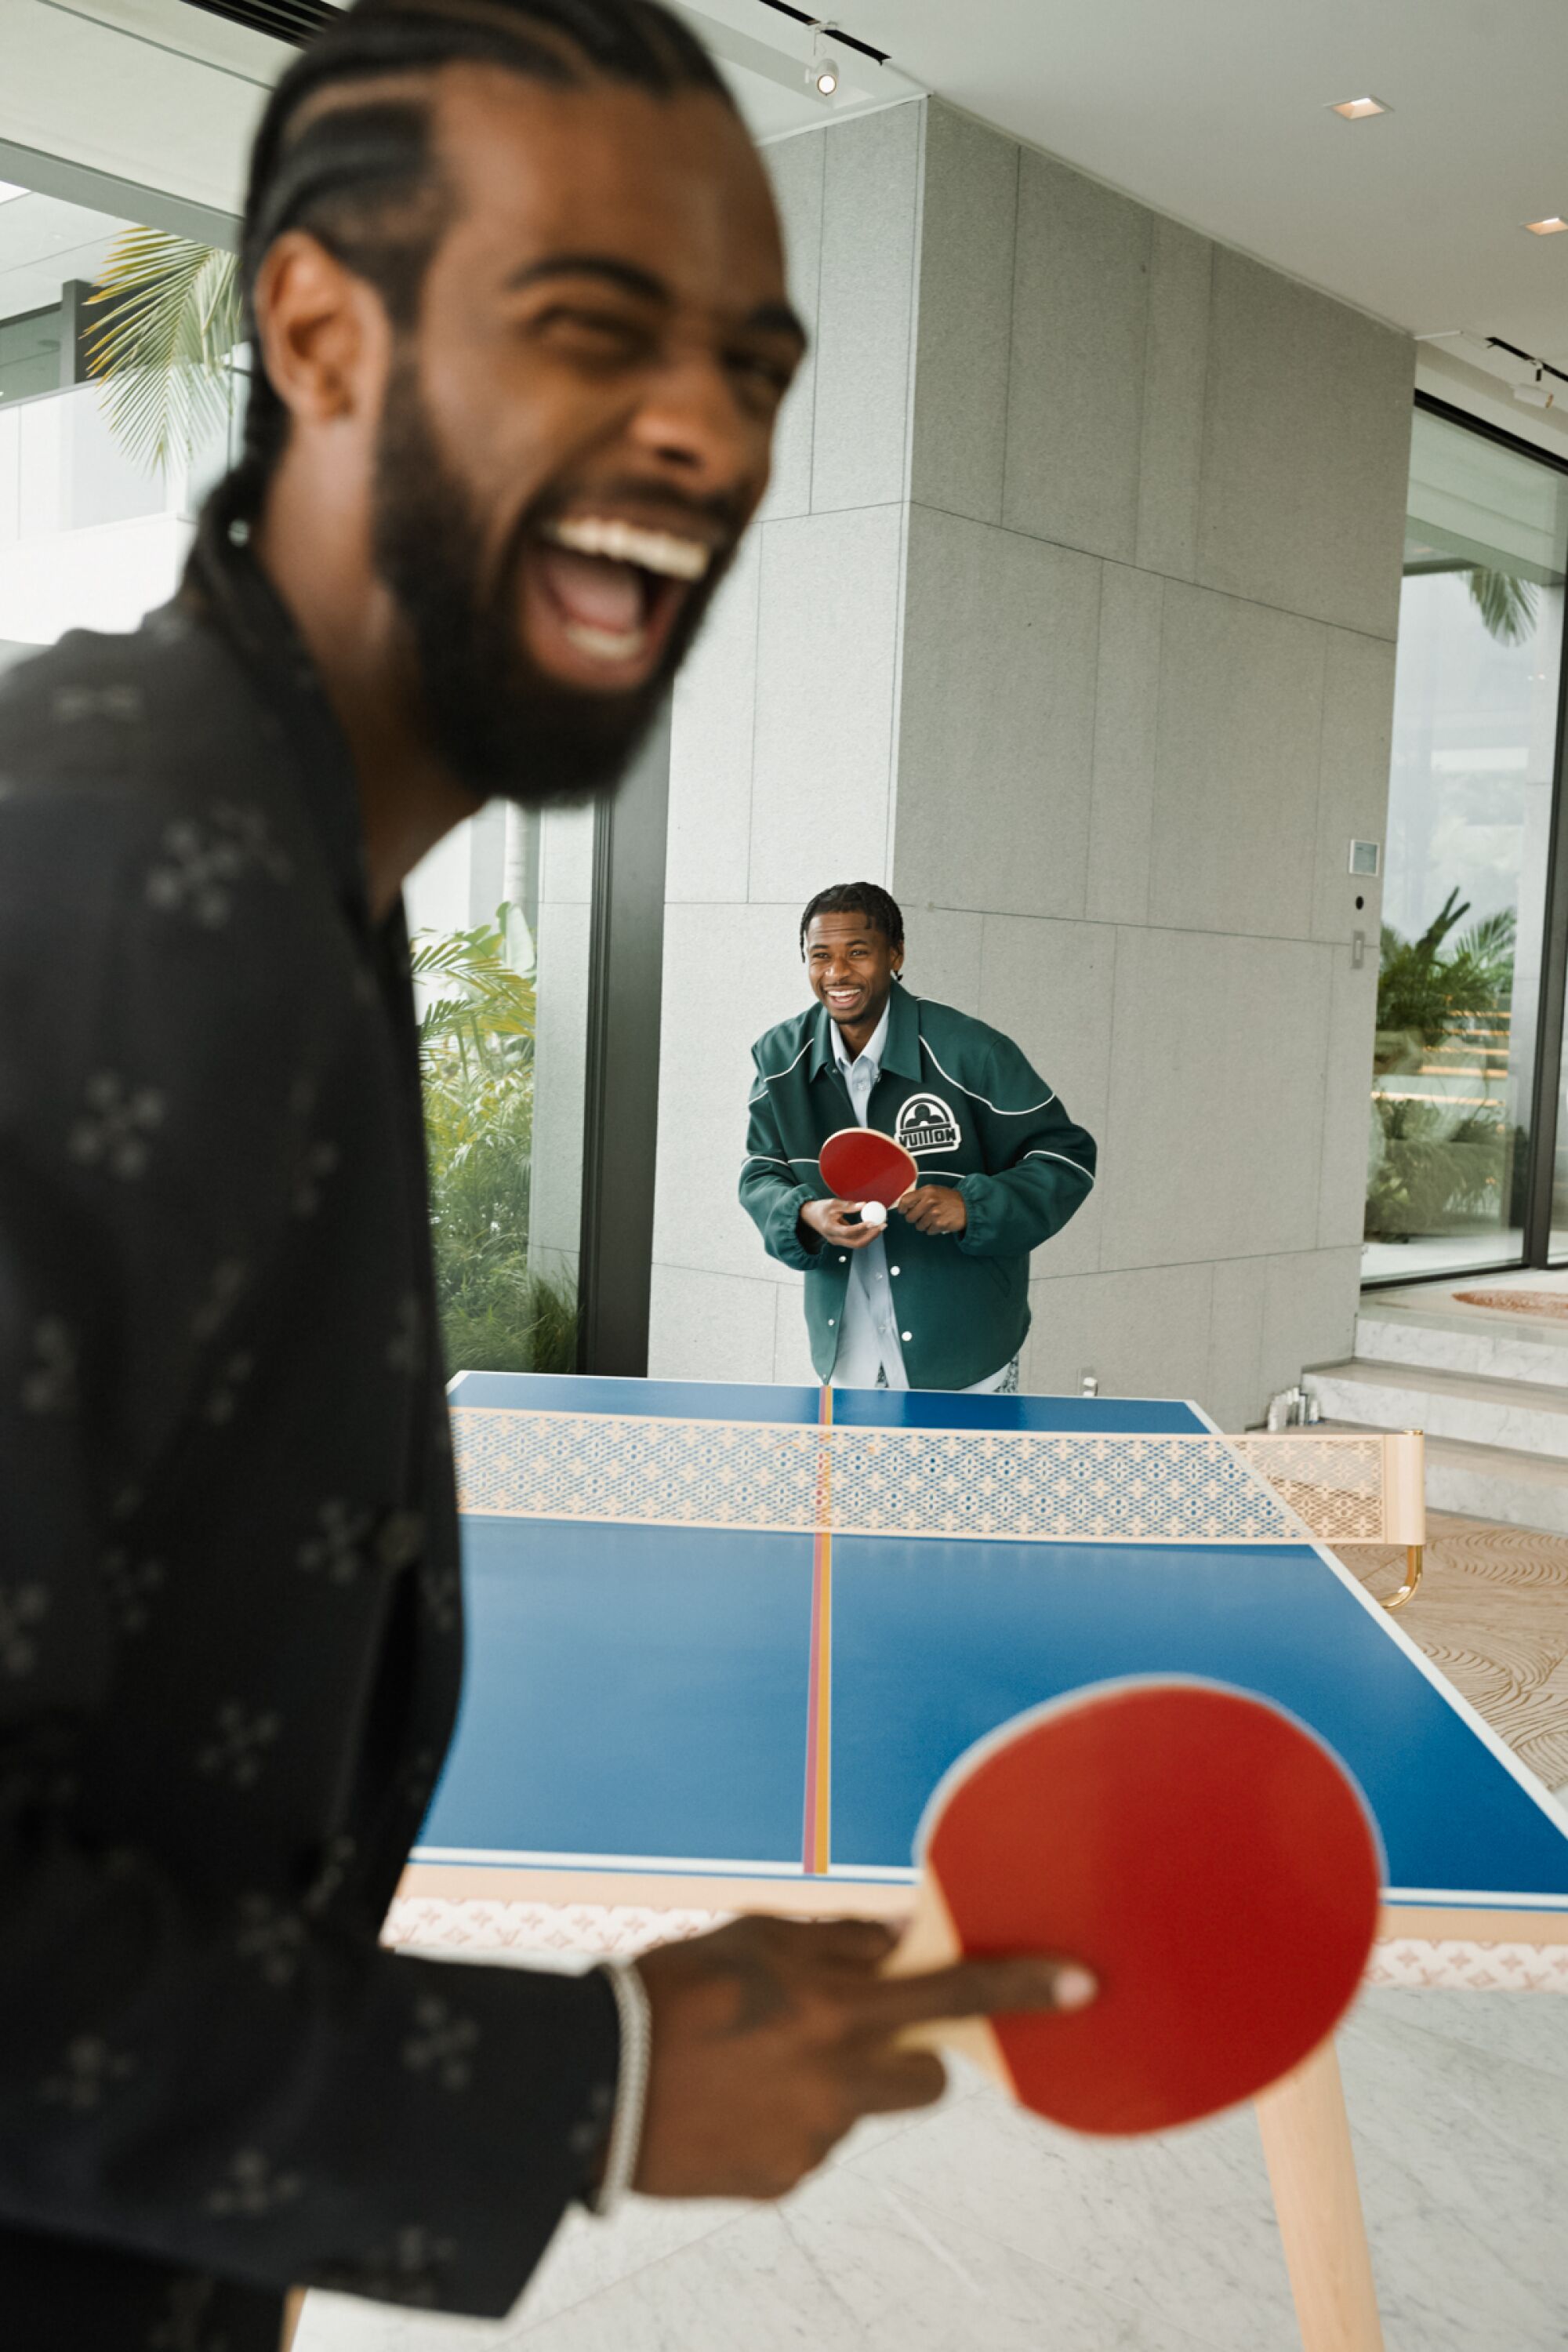 Two people laugh and play ping pong.